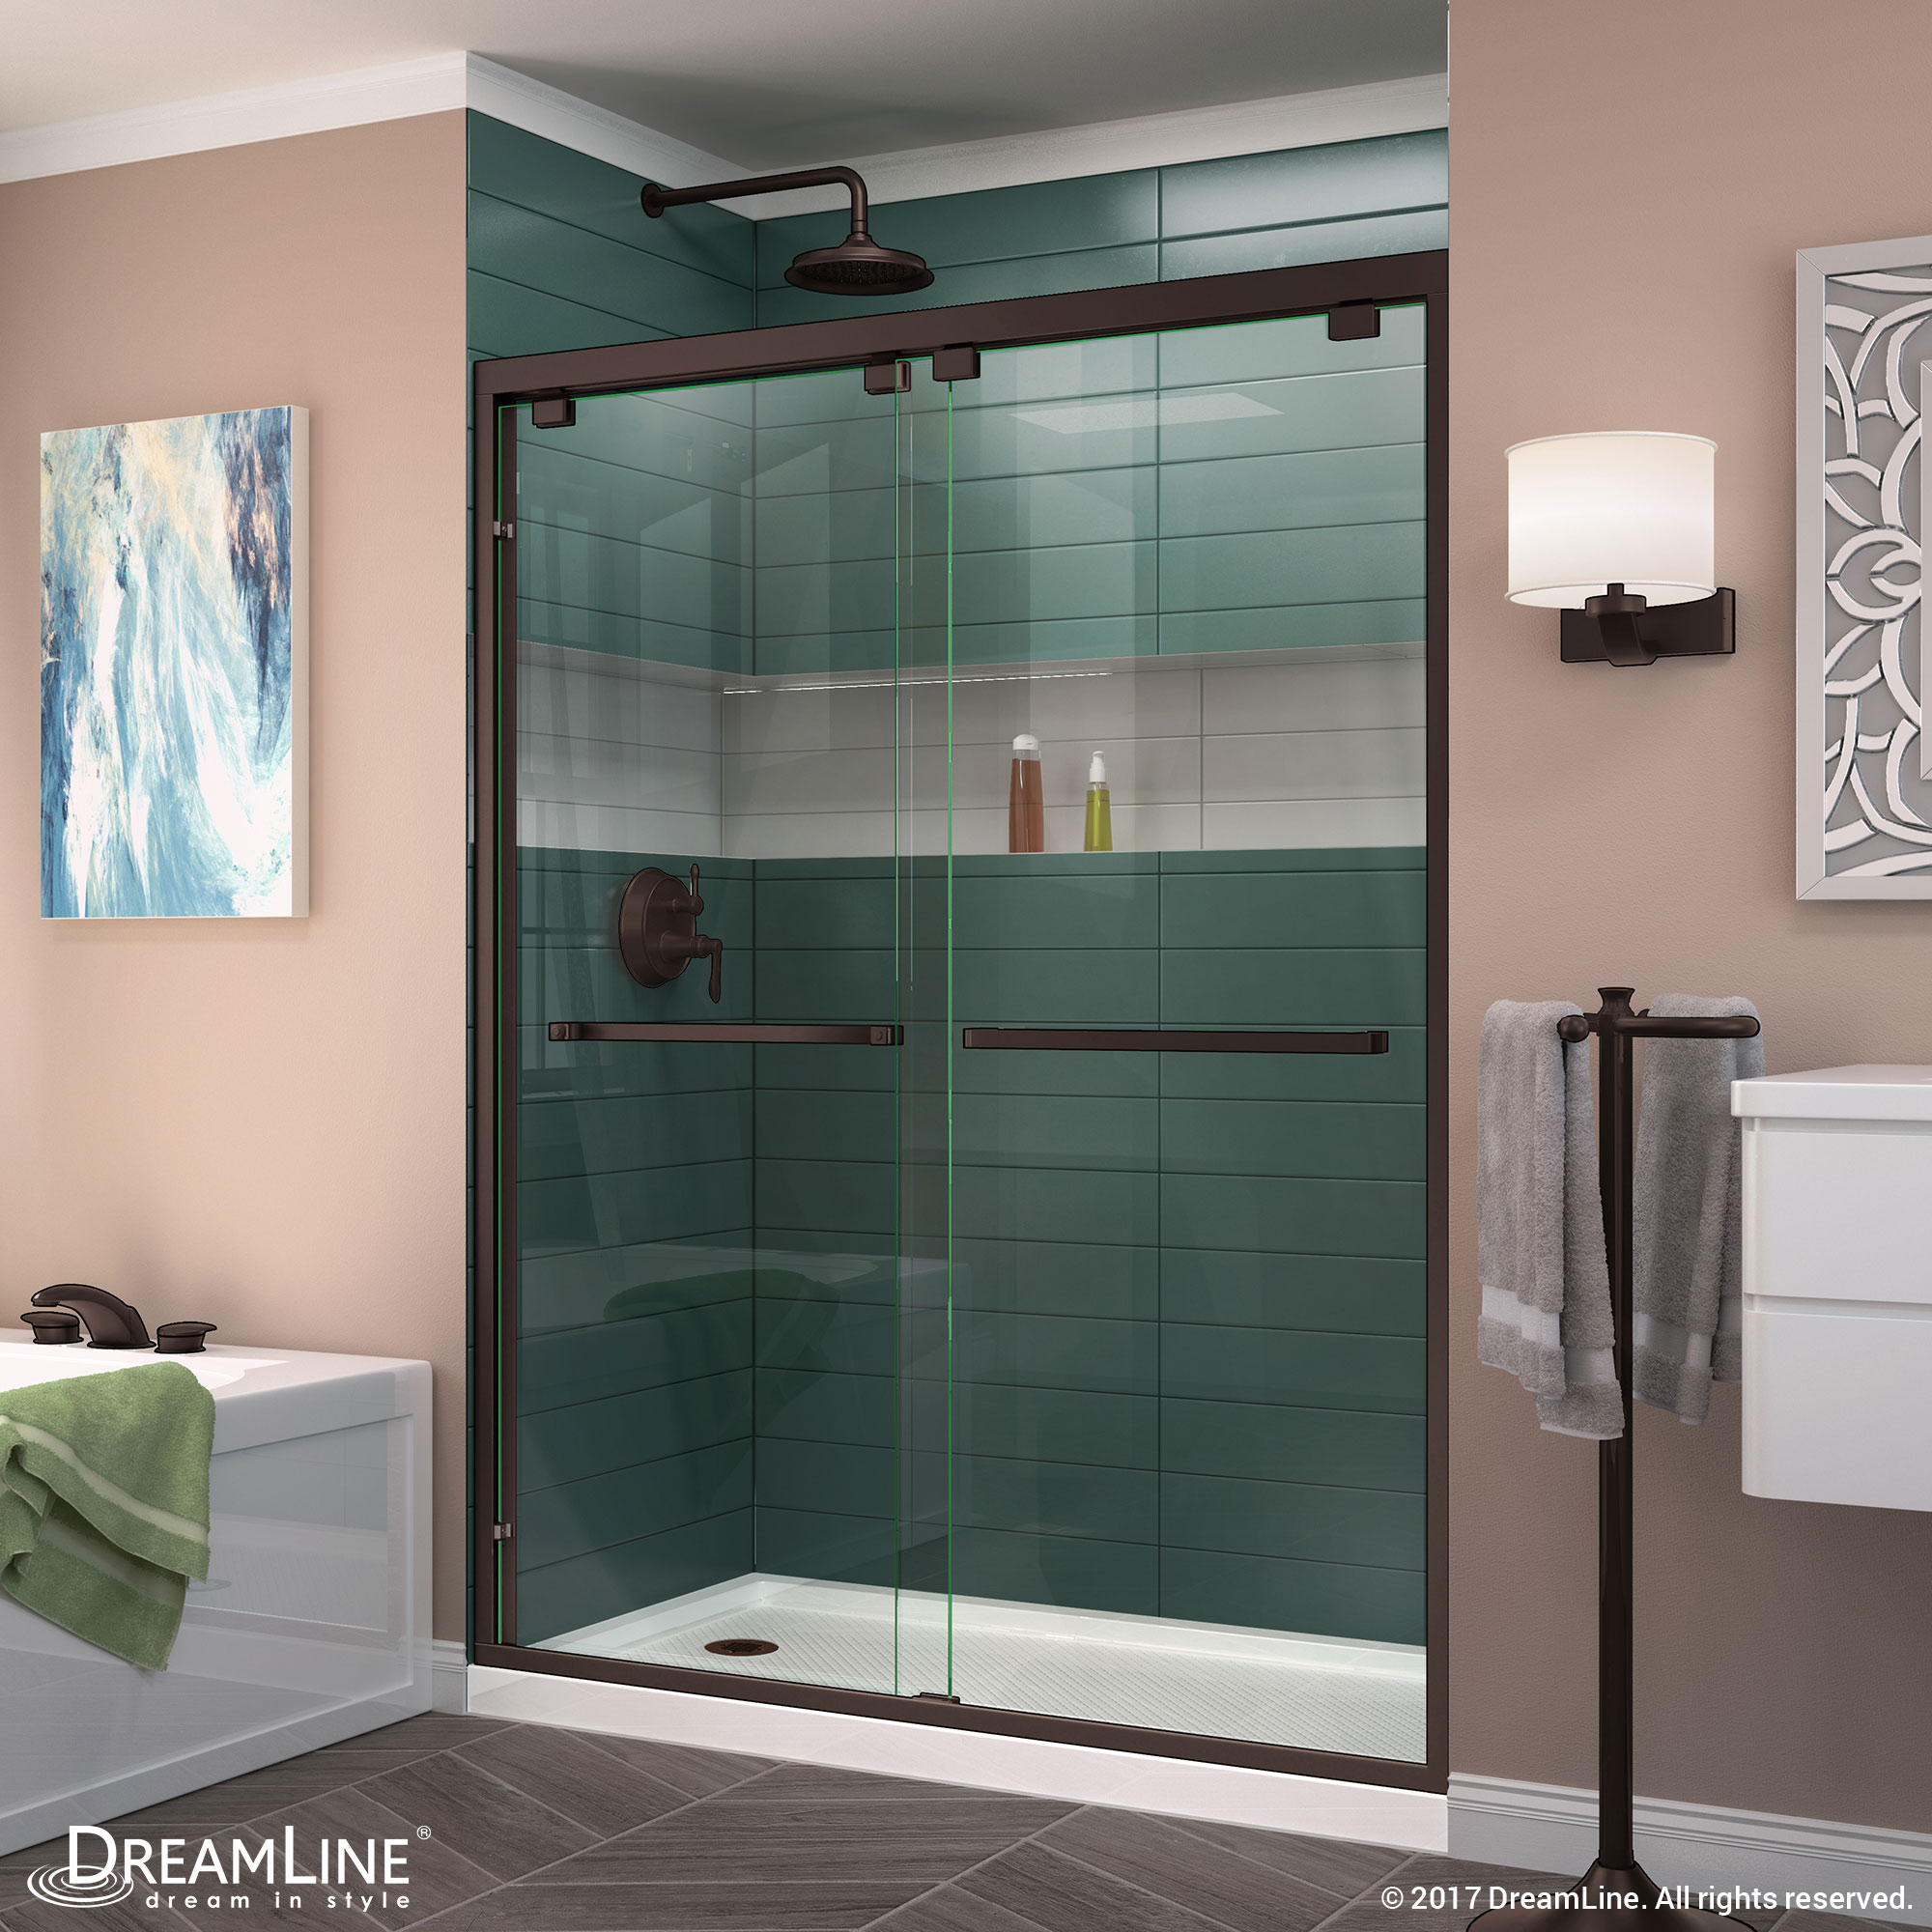 DreamLine Encore 34 in. D x 60 in. W x 78 3/4 in. H Bypass Shower Door in Chrome and Right Drain Biscuit Base Kit